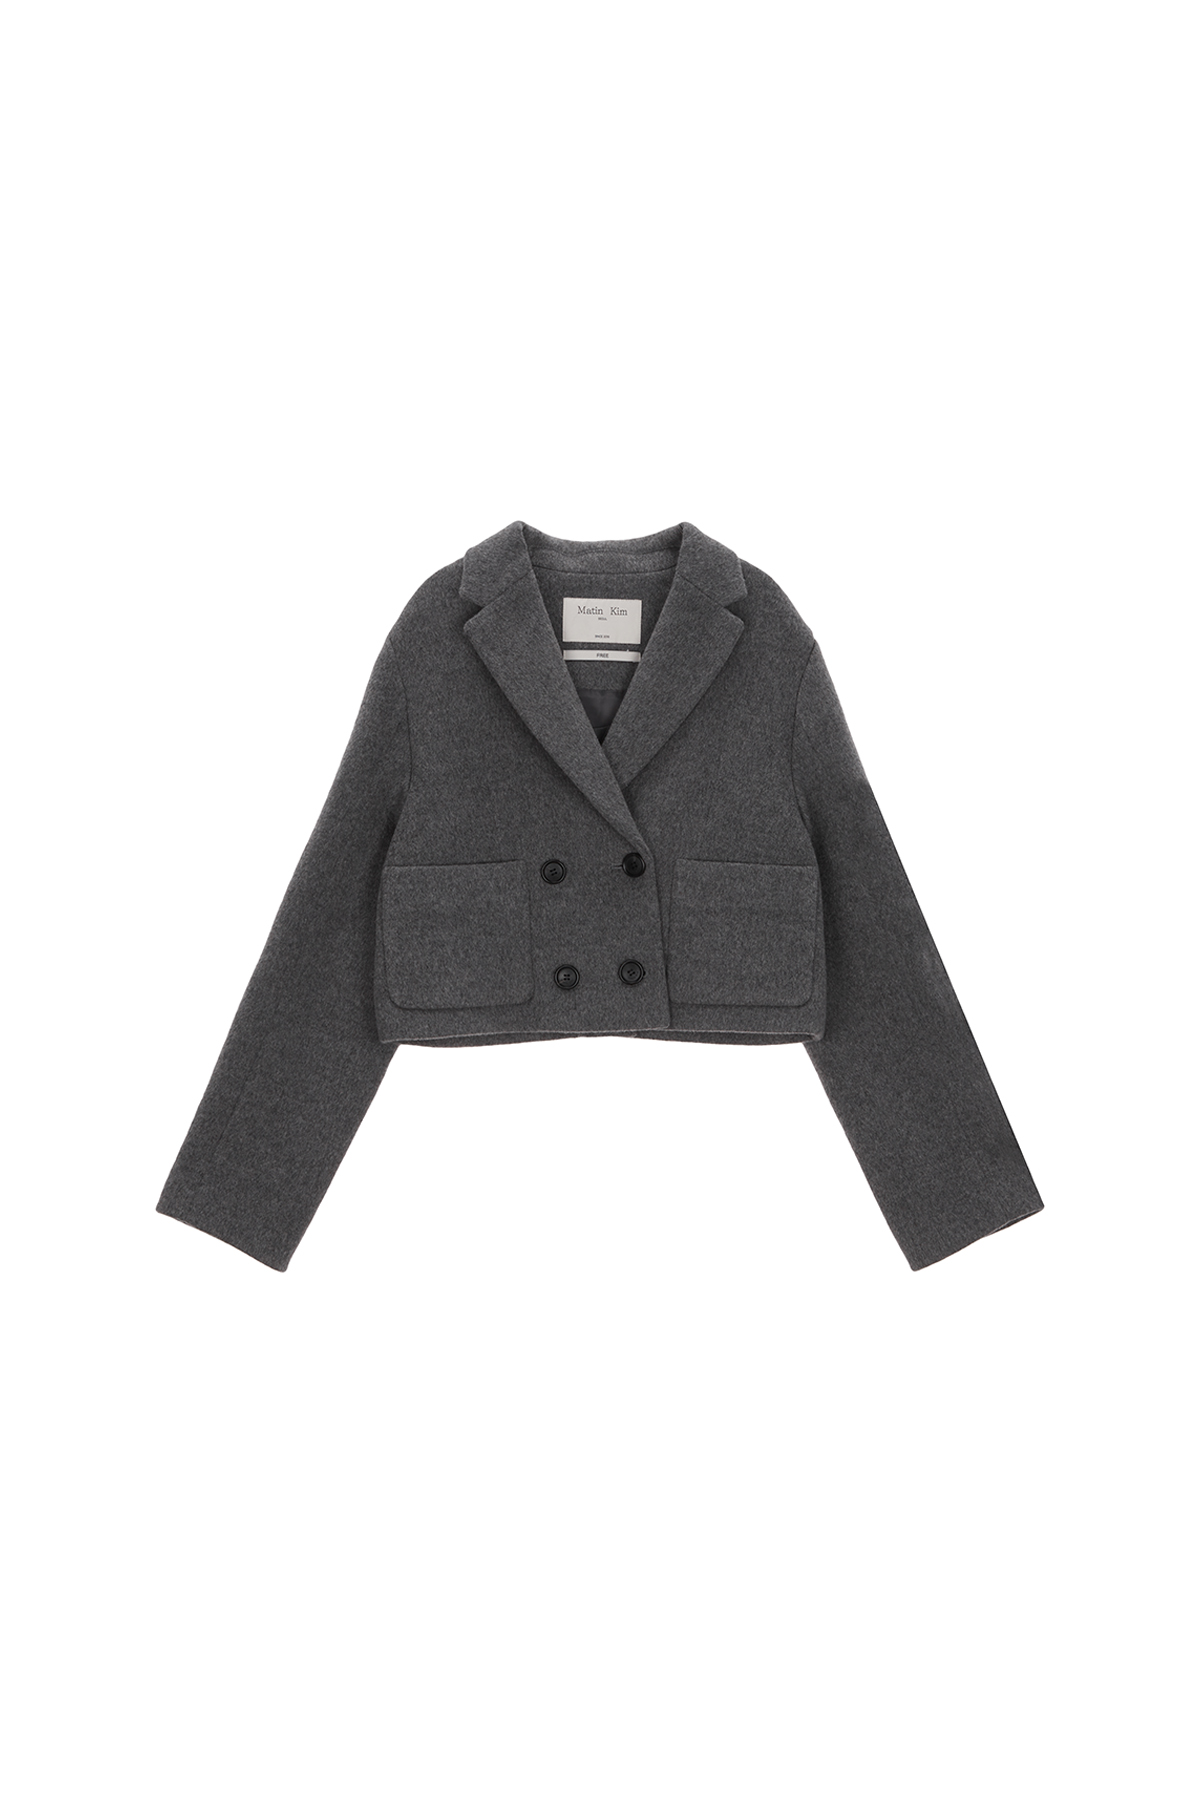 TAILORED DOUBLE CROP COAT IN CHARCOAL